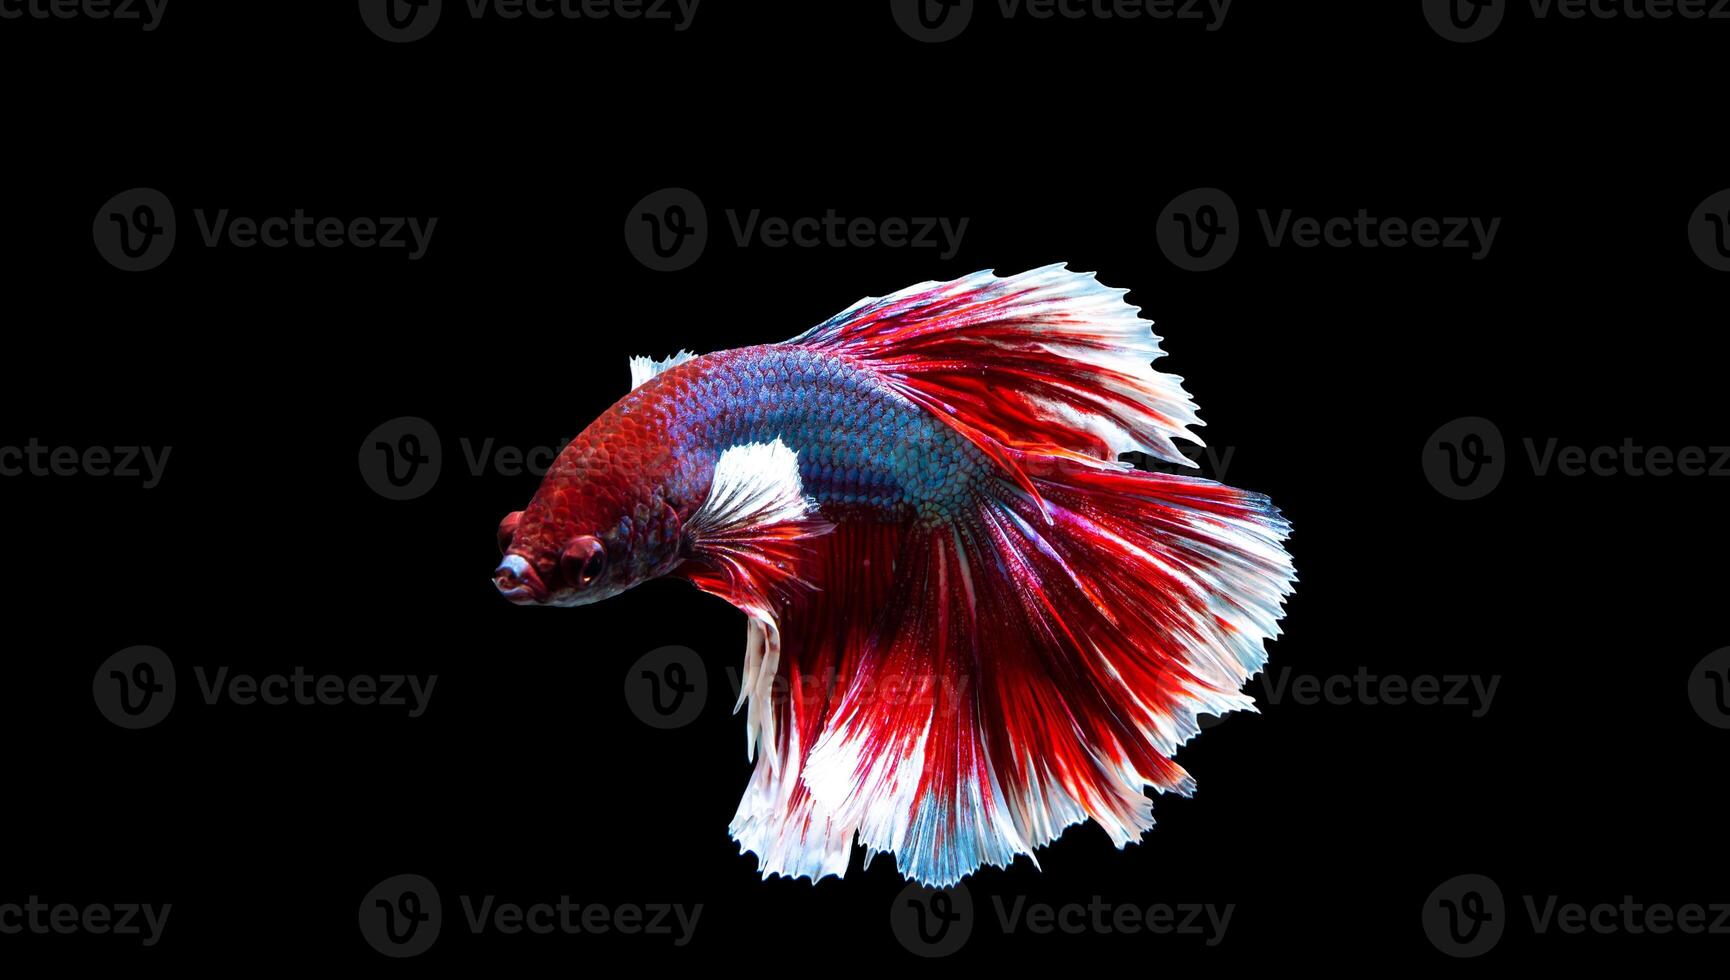 Fish from thailand is colorful on black background  hlaf moon photo